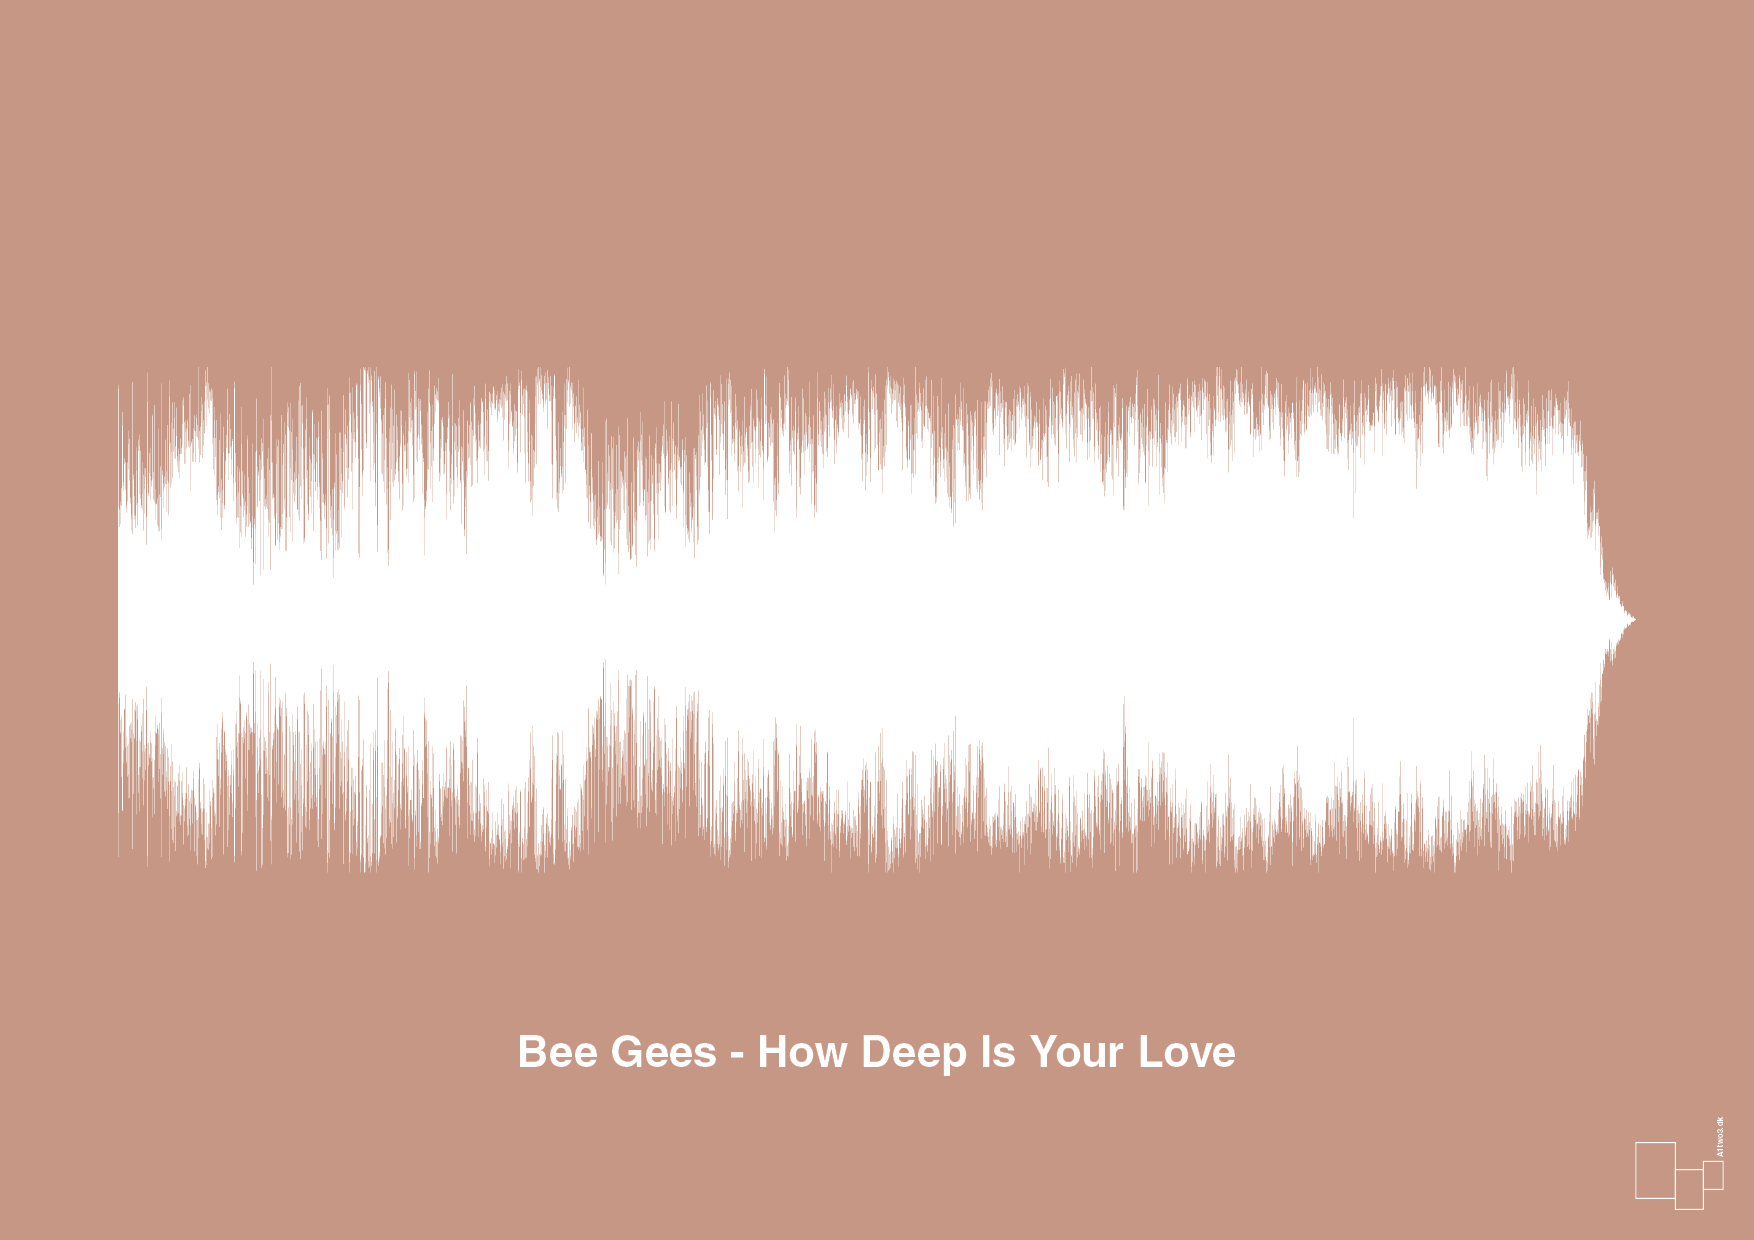 bee gees - how deep is your love - Plakat med Musik i Powder